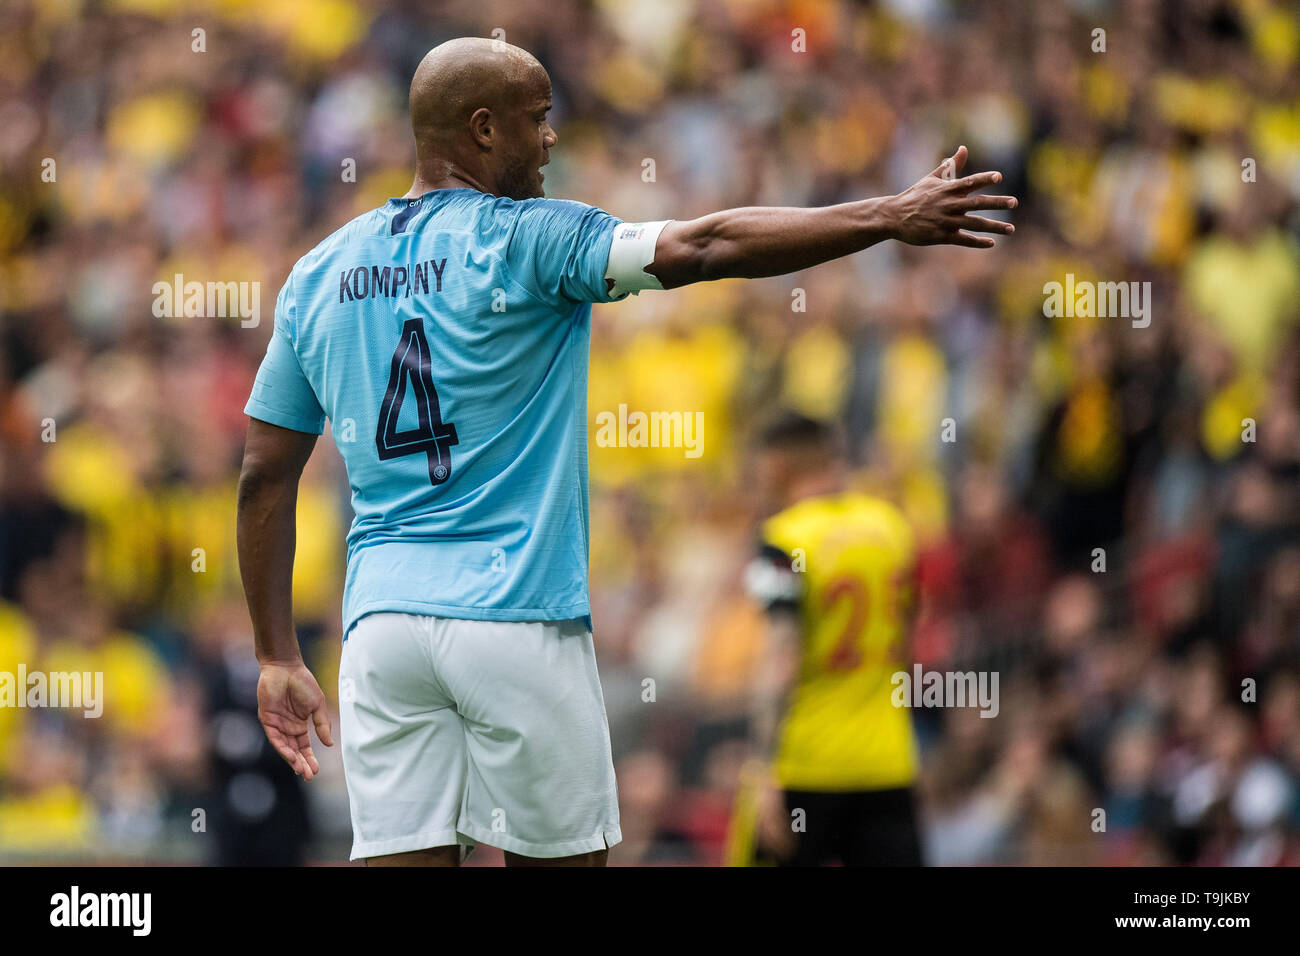 LONDON, ENGLAND - MAY 18: Vincent Kompany of Manchester City during the FA Cup Final match between Manchester City and Watford at Wembley Stadium on May 18, 2019 in London, England. (Photo by Sebastian Frej/MB Media) Stock Photo